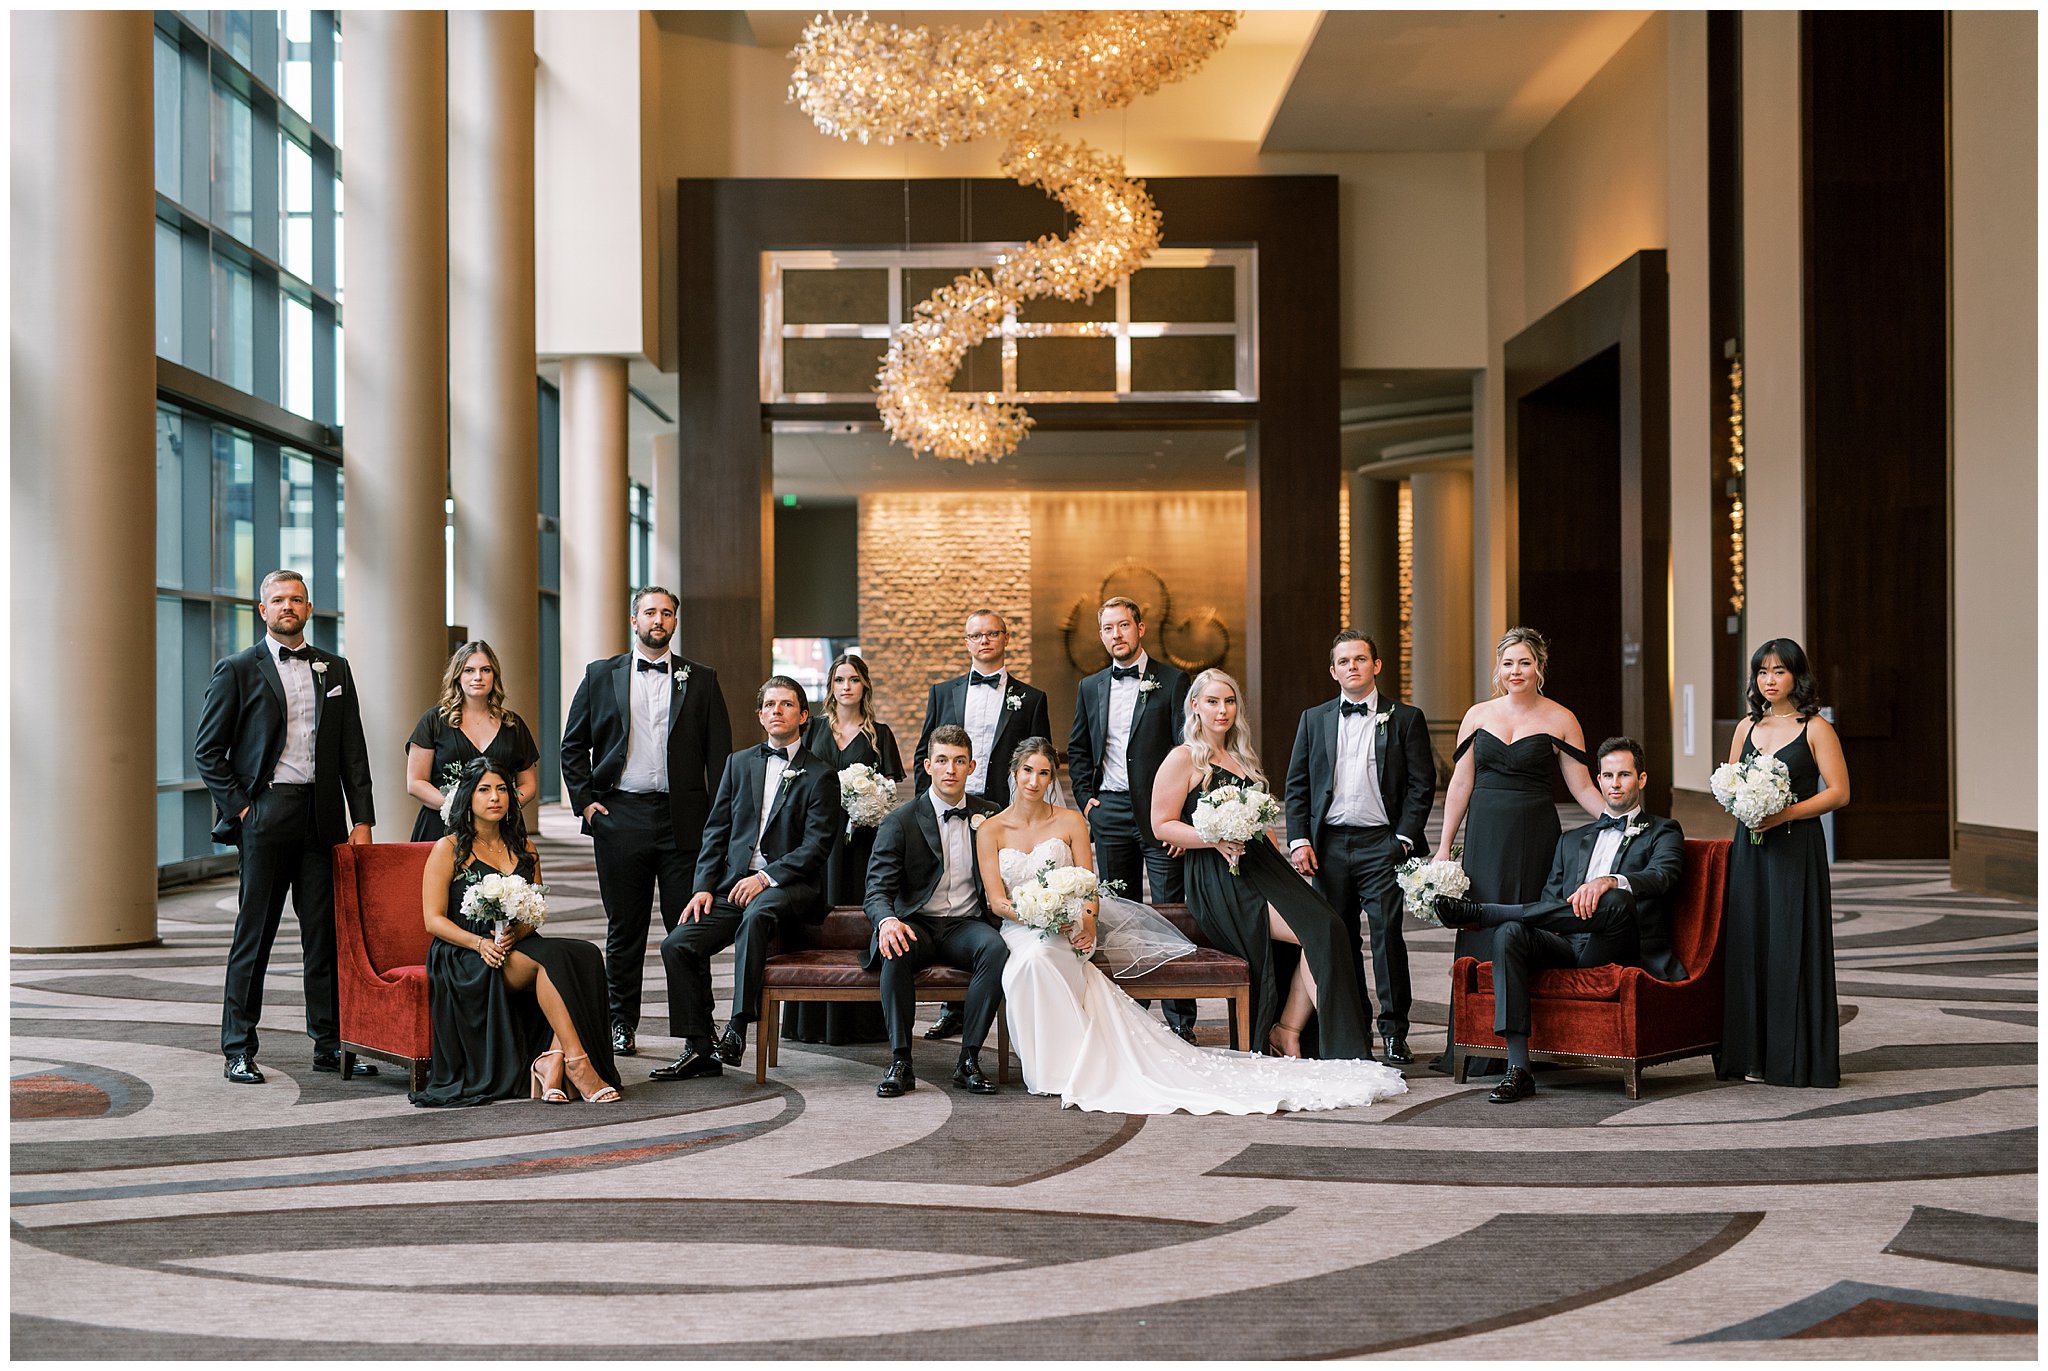 classic wedding party portraits from Nashville wedding 